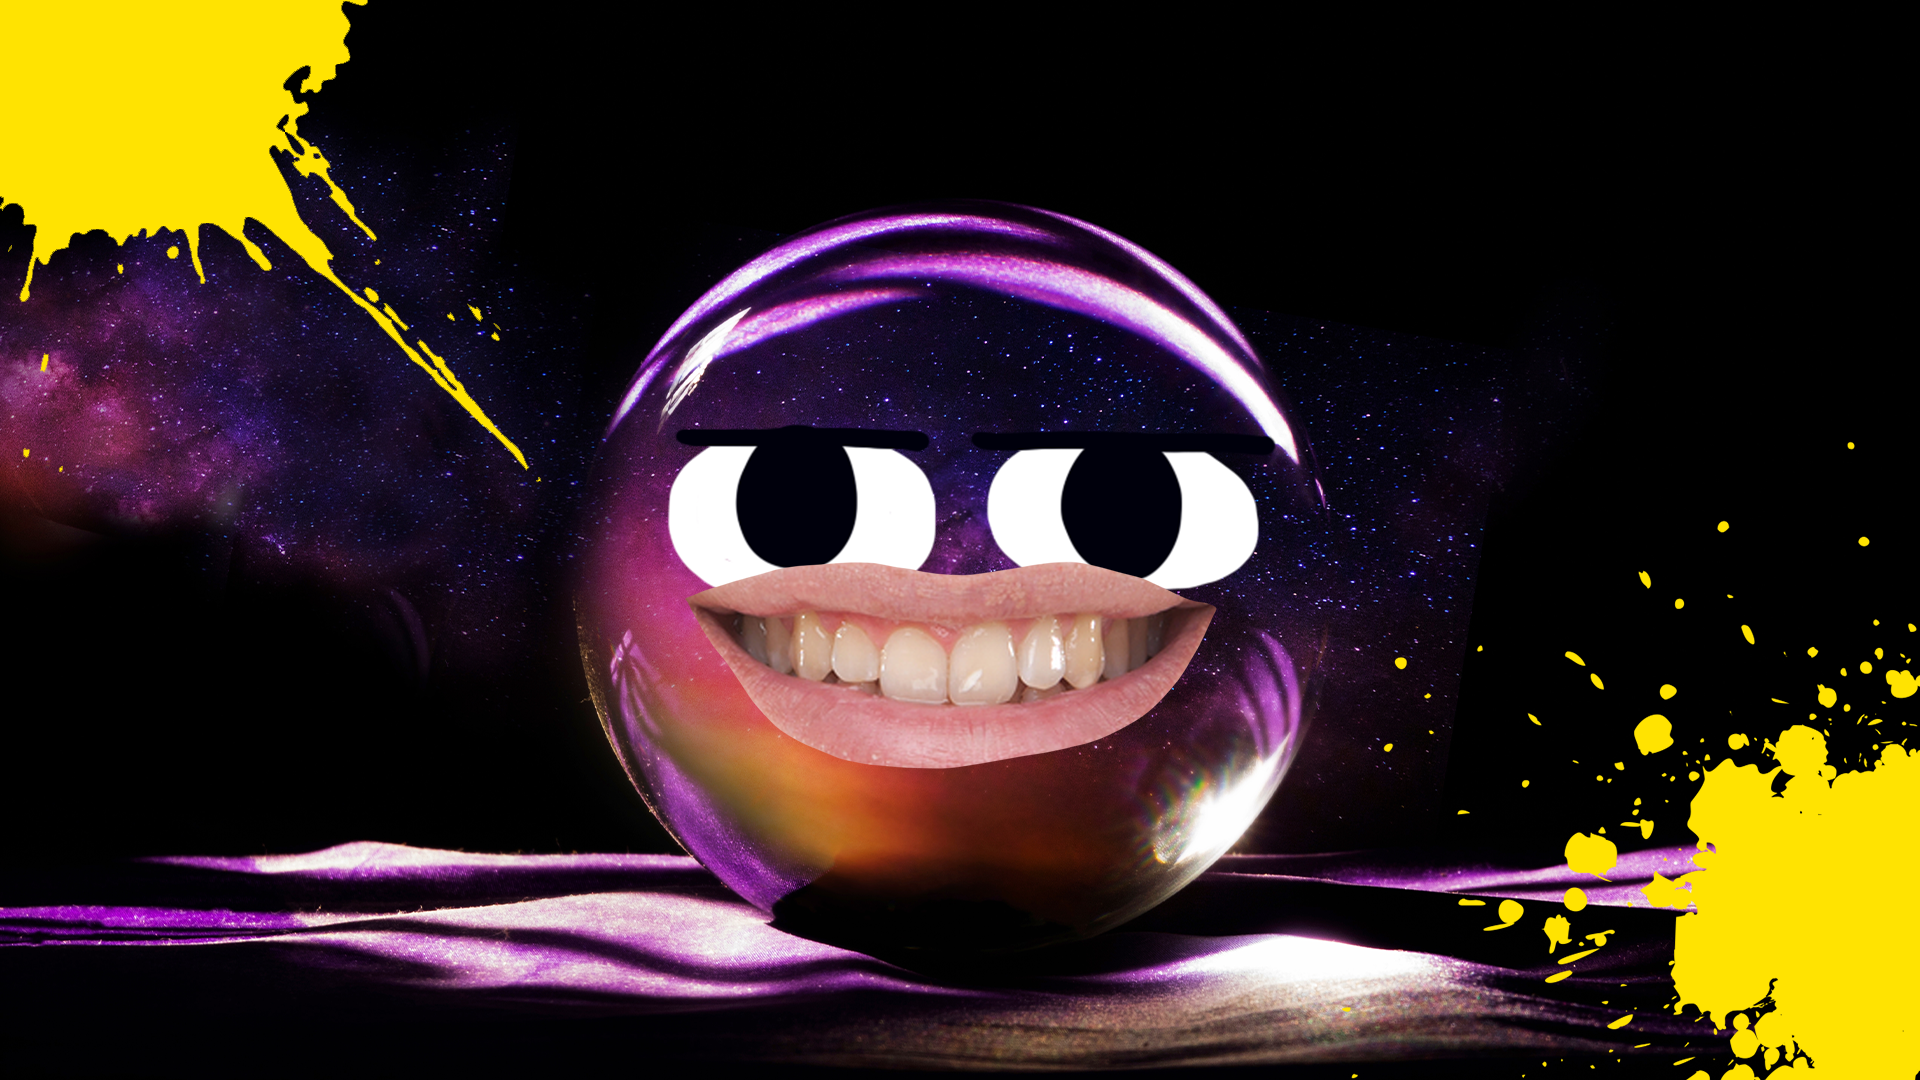 A goofy crystal ball and some splats